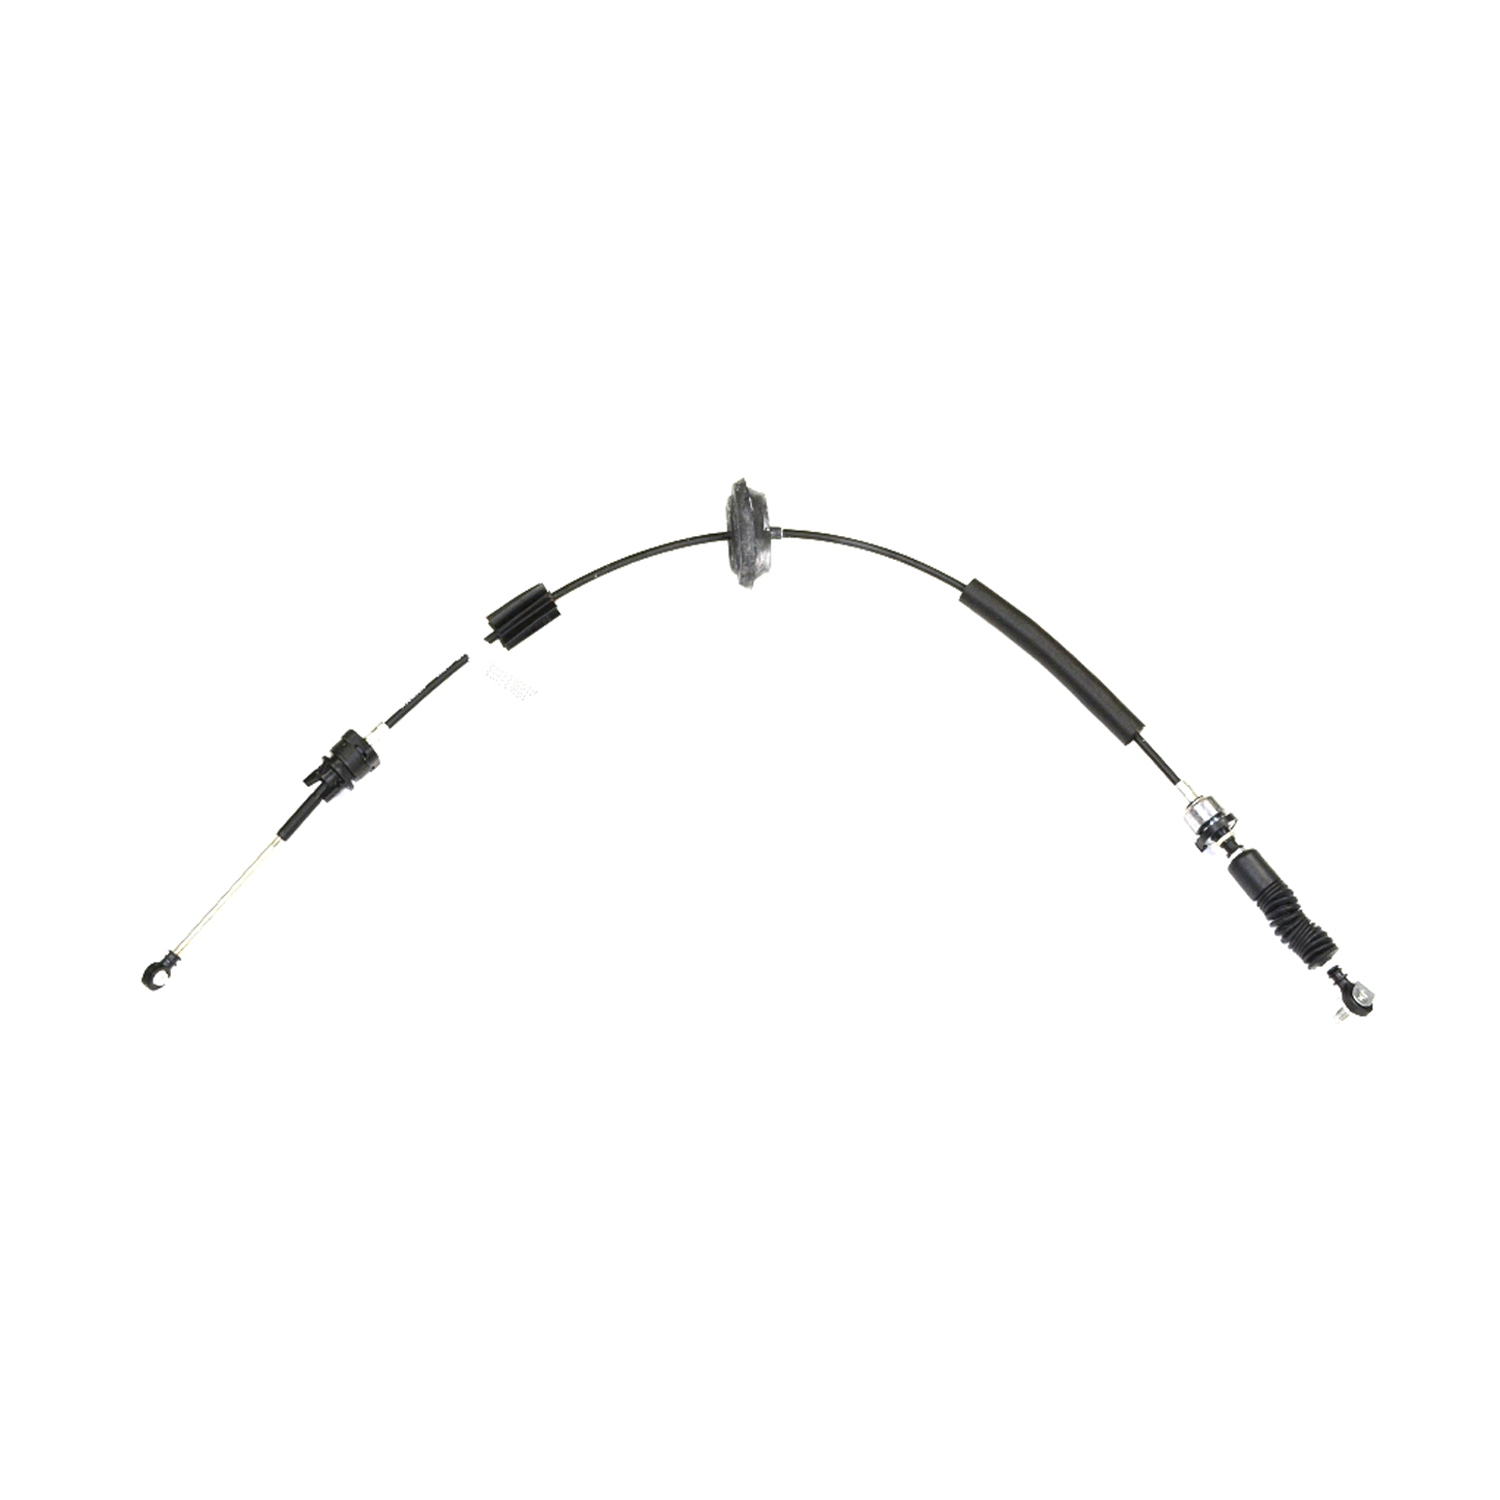 MOPAR BRAND - Automatic Transmission Shifter Cable - MPB 68024433AD